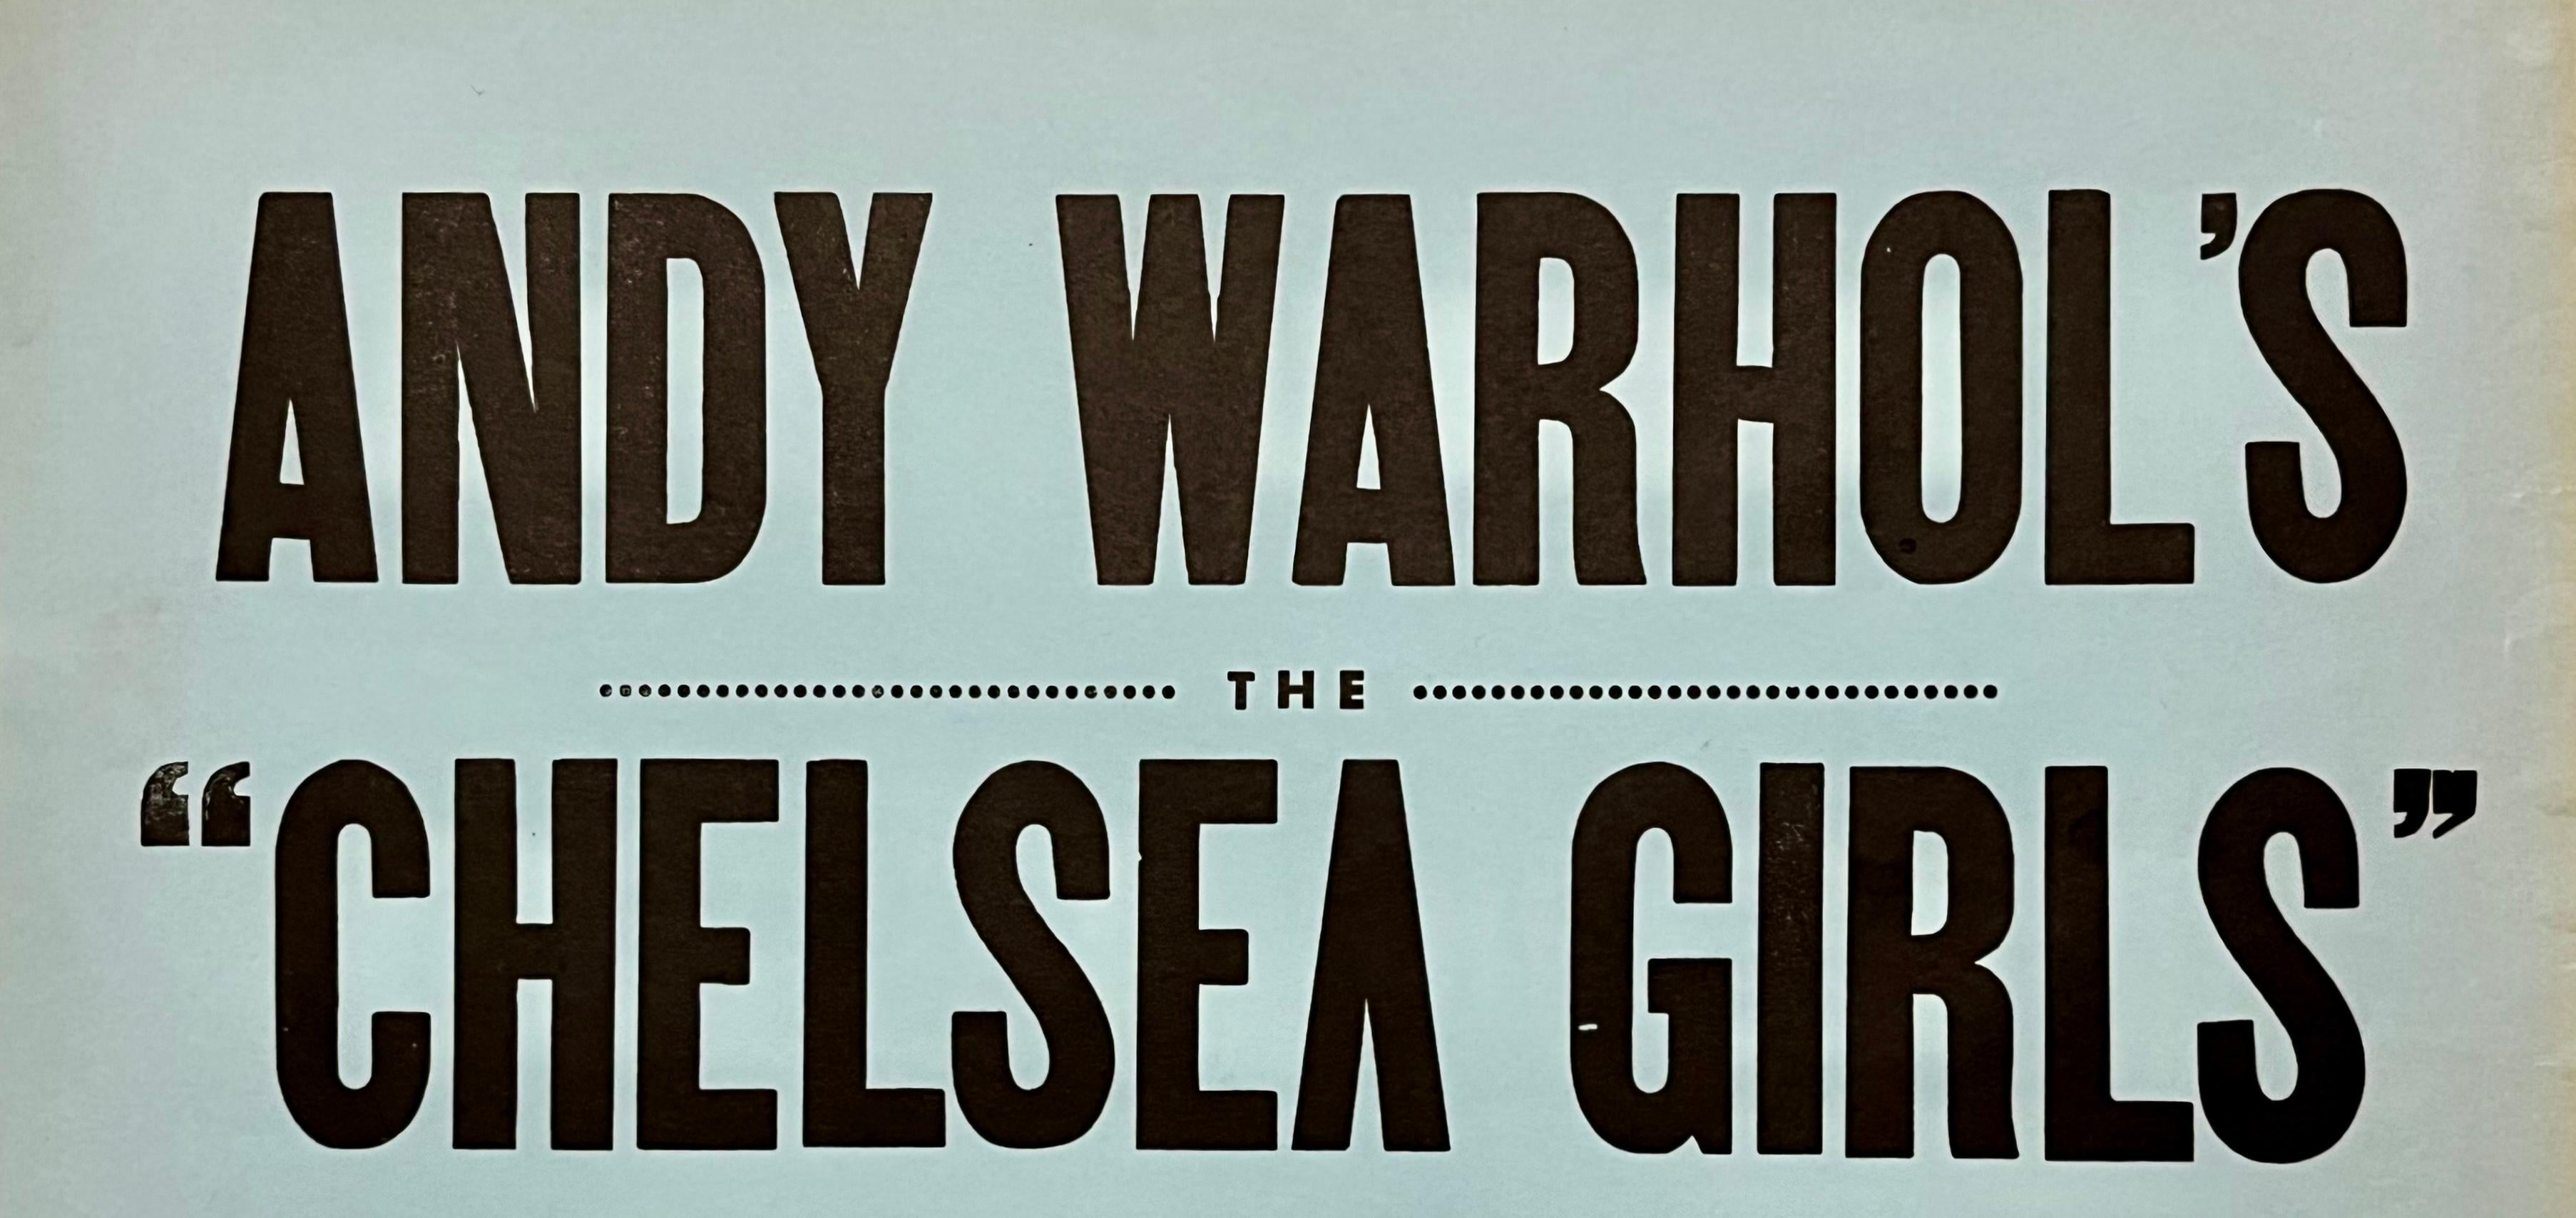 Andy Warhol Chelsea Girls 1966 (announcement) For Sale 1